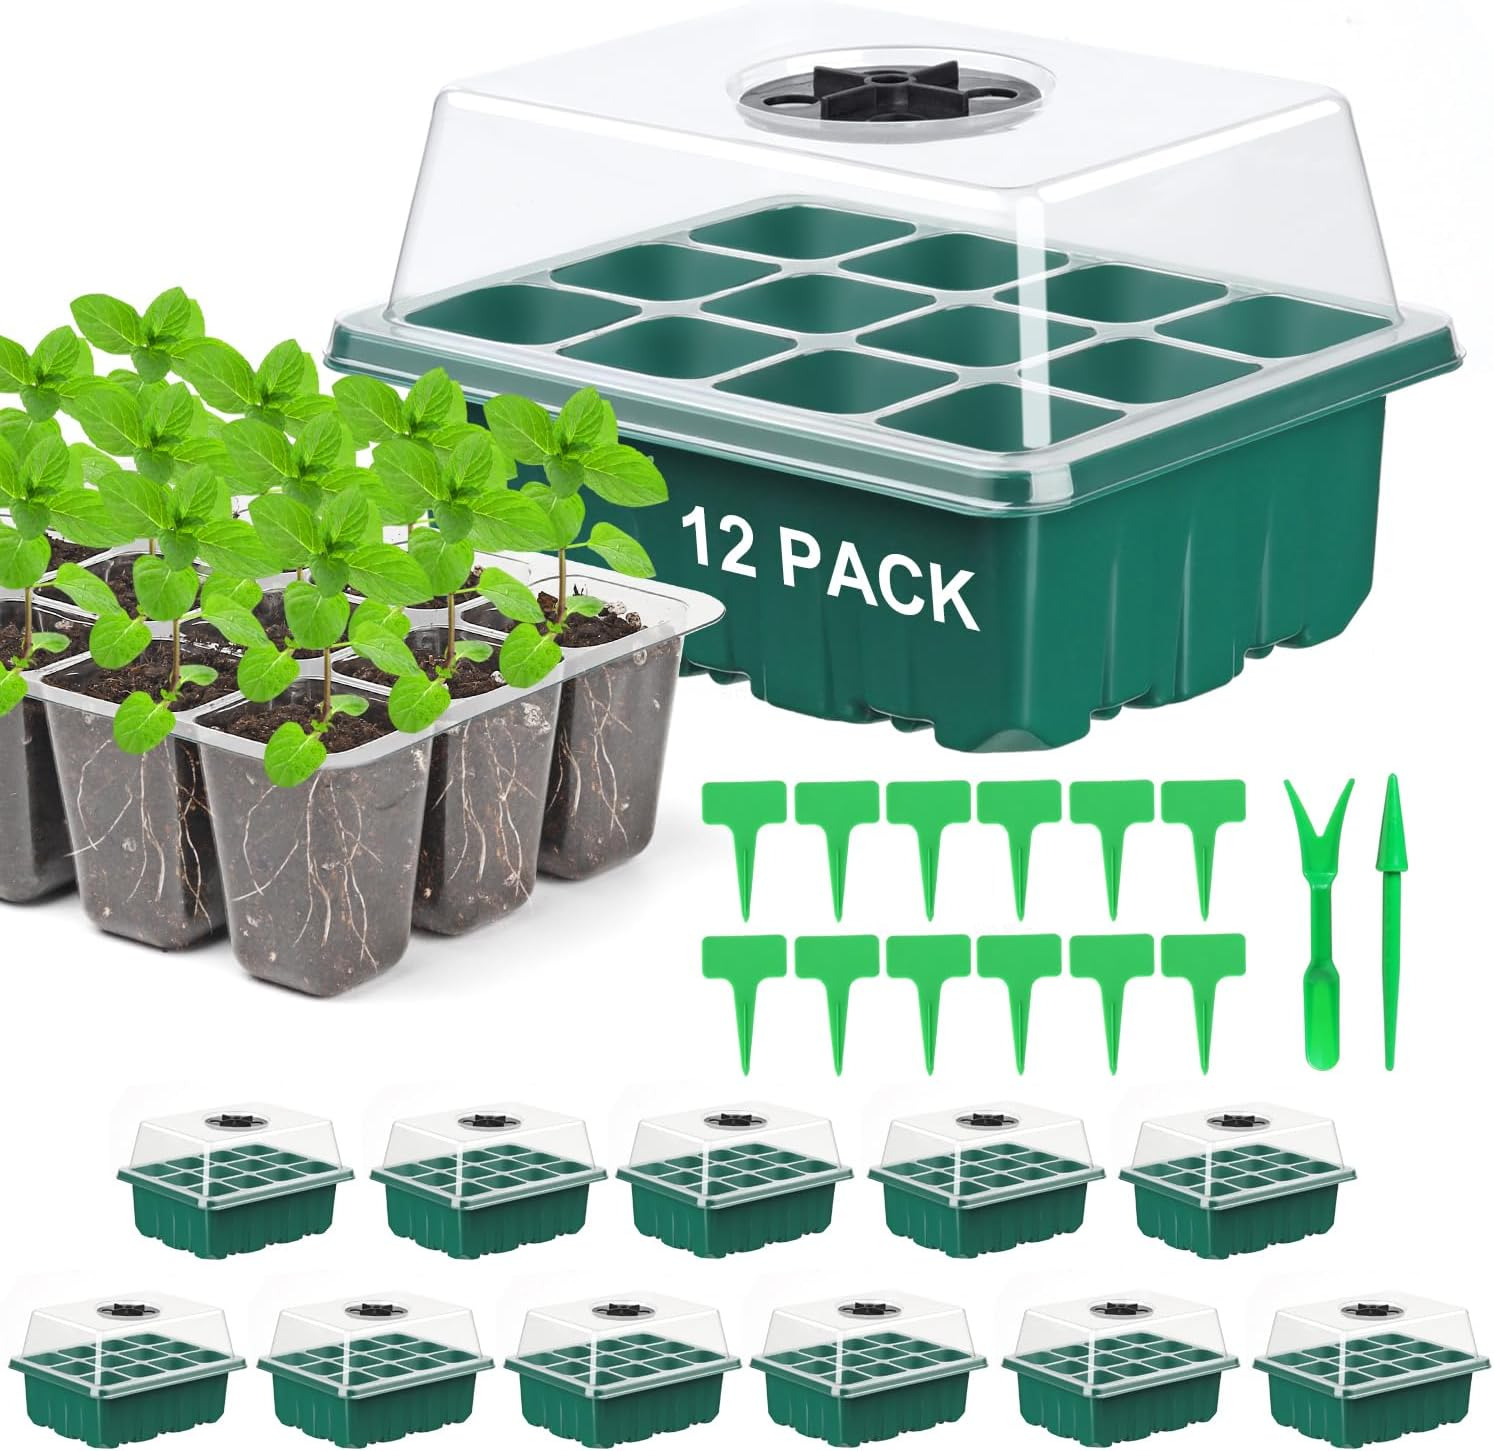 Seed Starter Tray Plant Starter Kit with Domes Germination Seeds Growing Tray